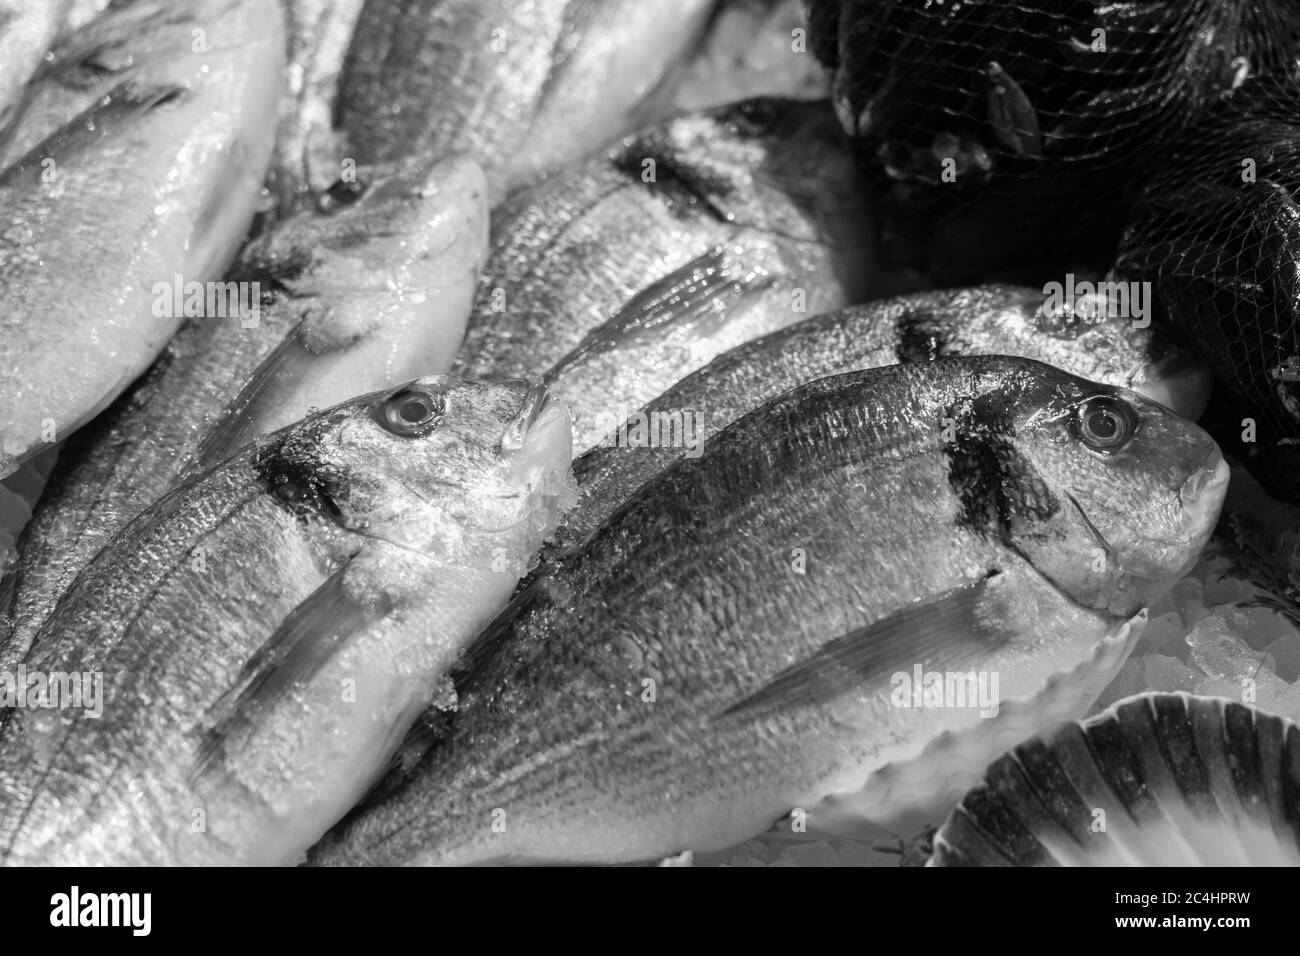 Chunky Gilt-head Bream on display at a Fishmongers in Leeds Market, West Yorkshire, England, UK. Stock Photo